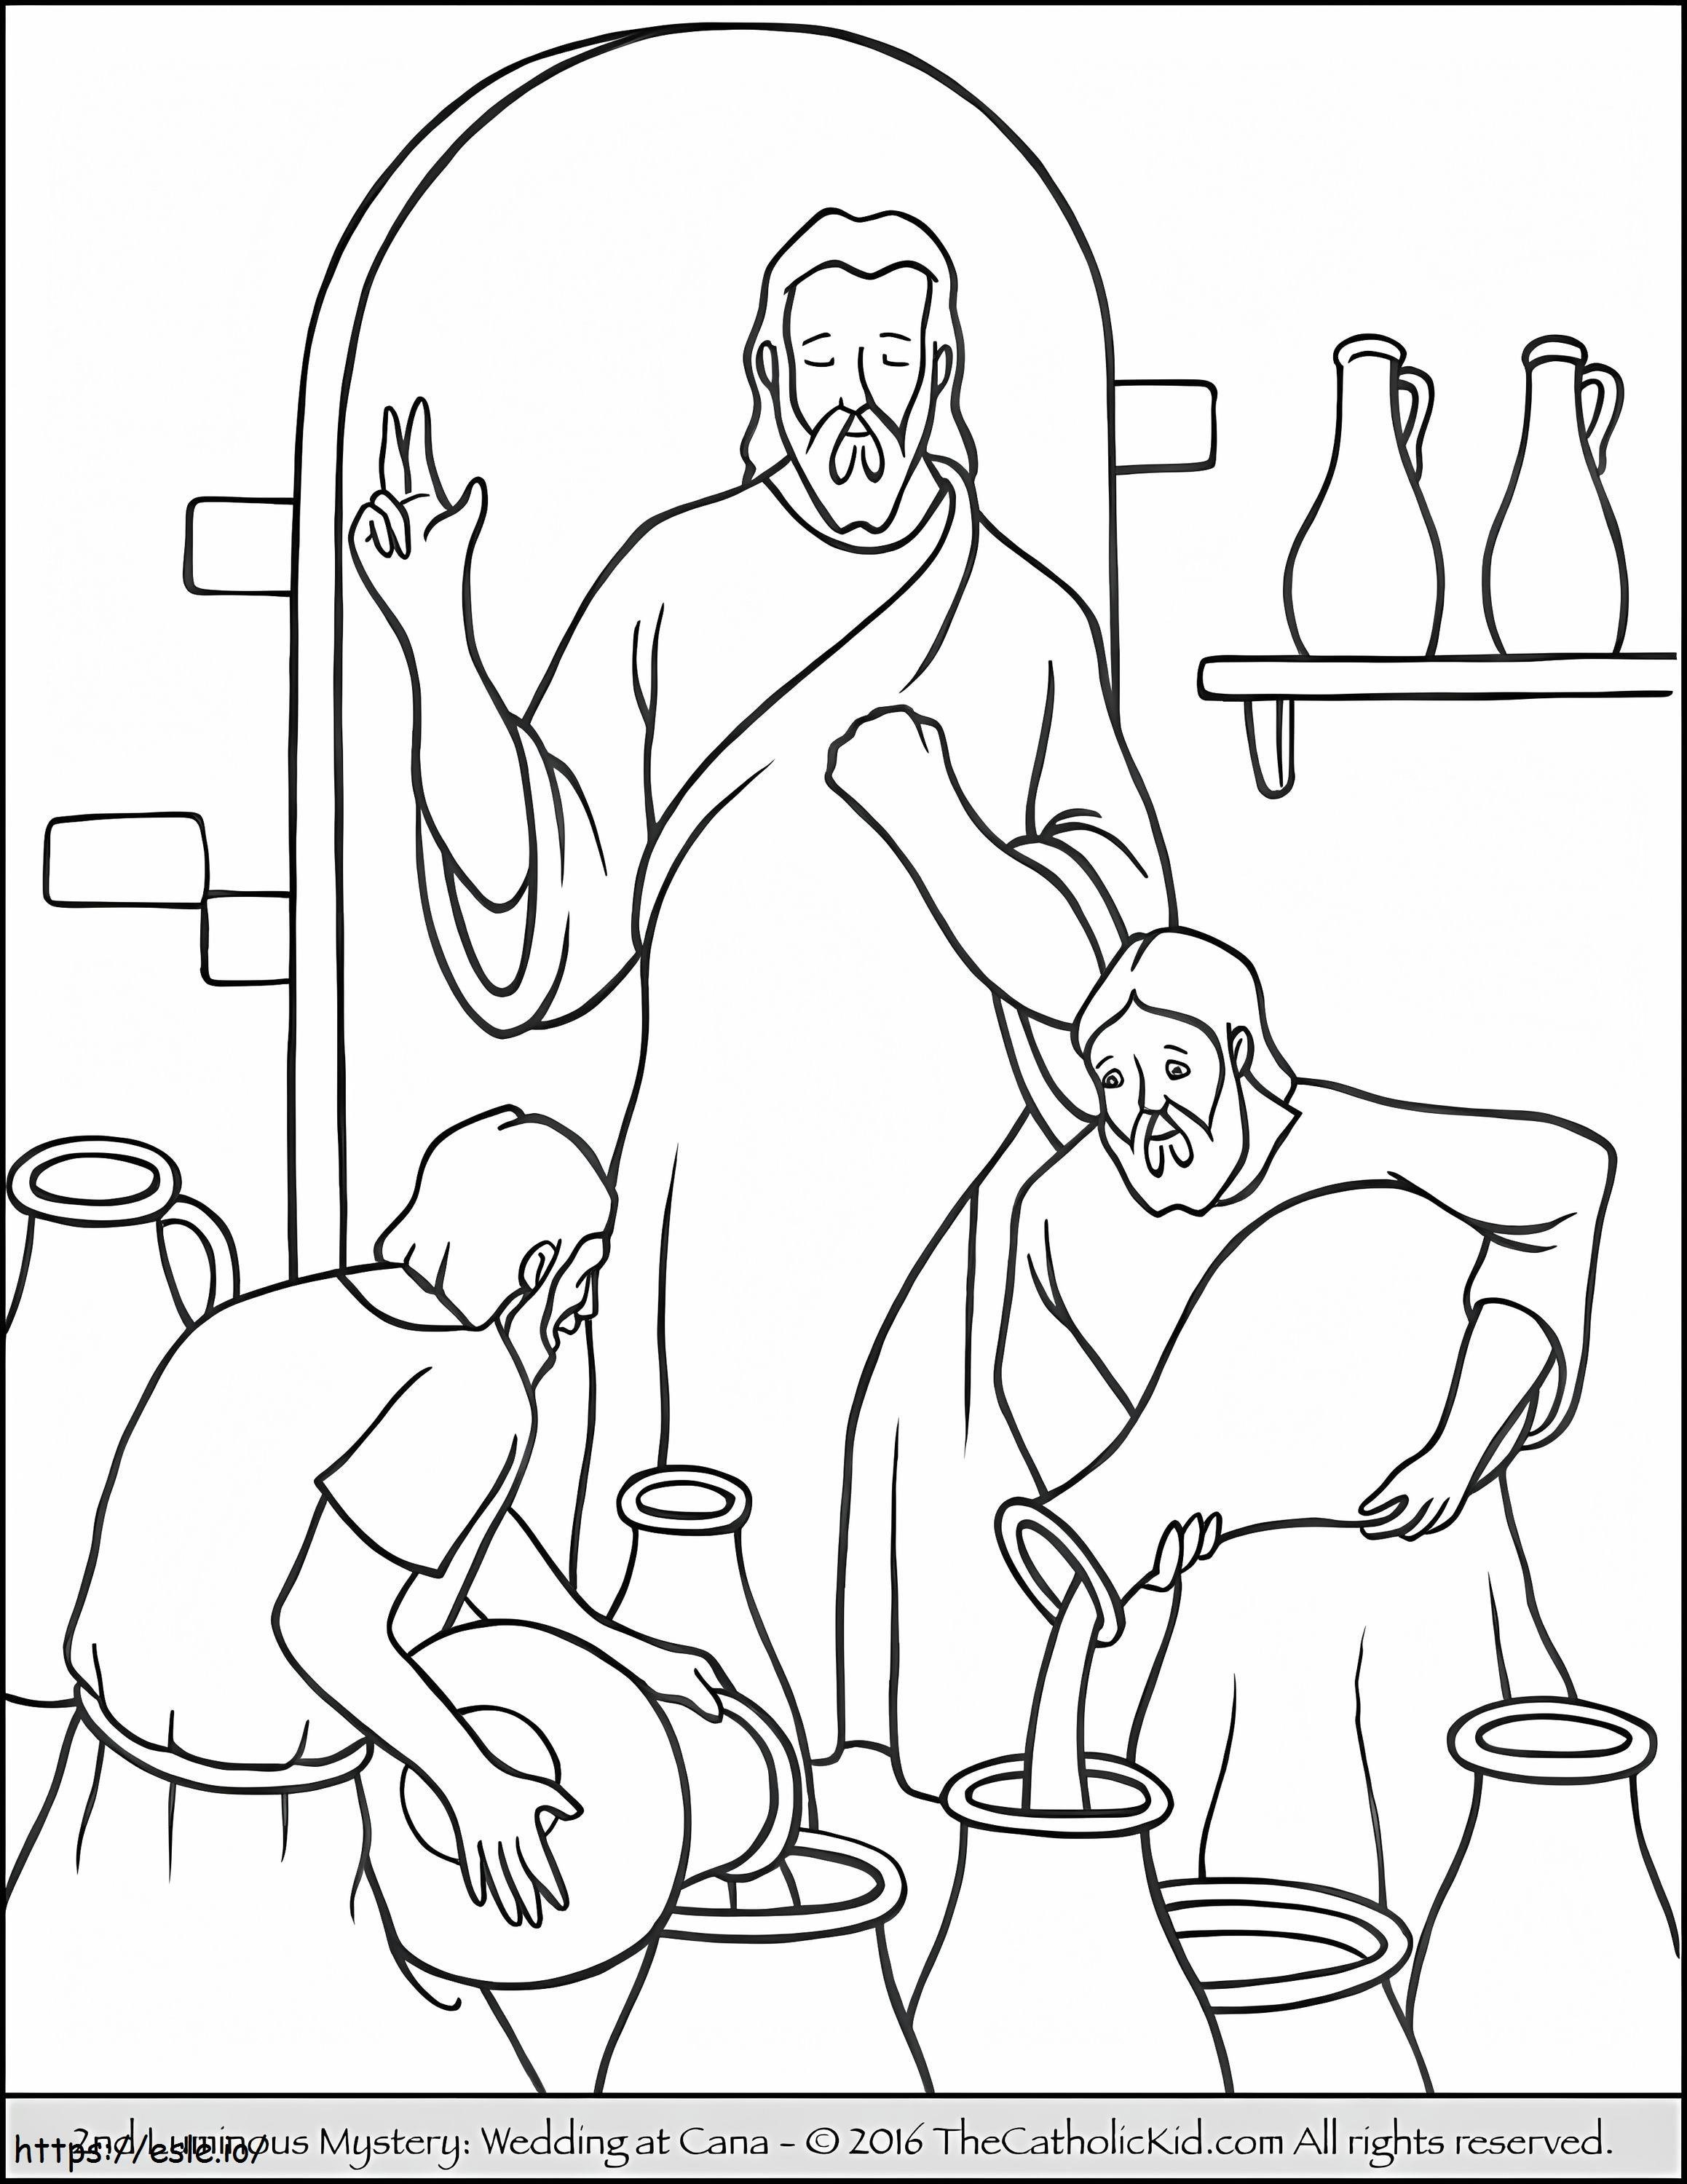 Epiphany 2 coloring page